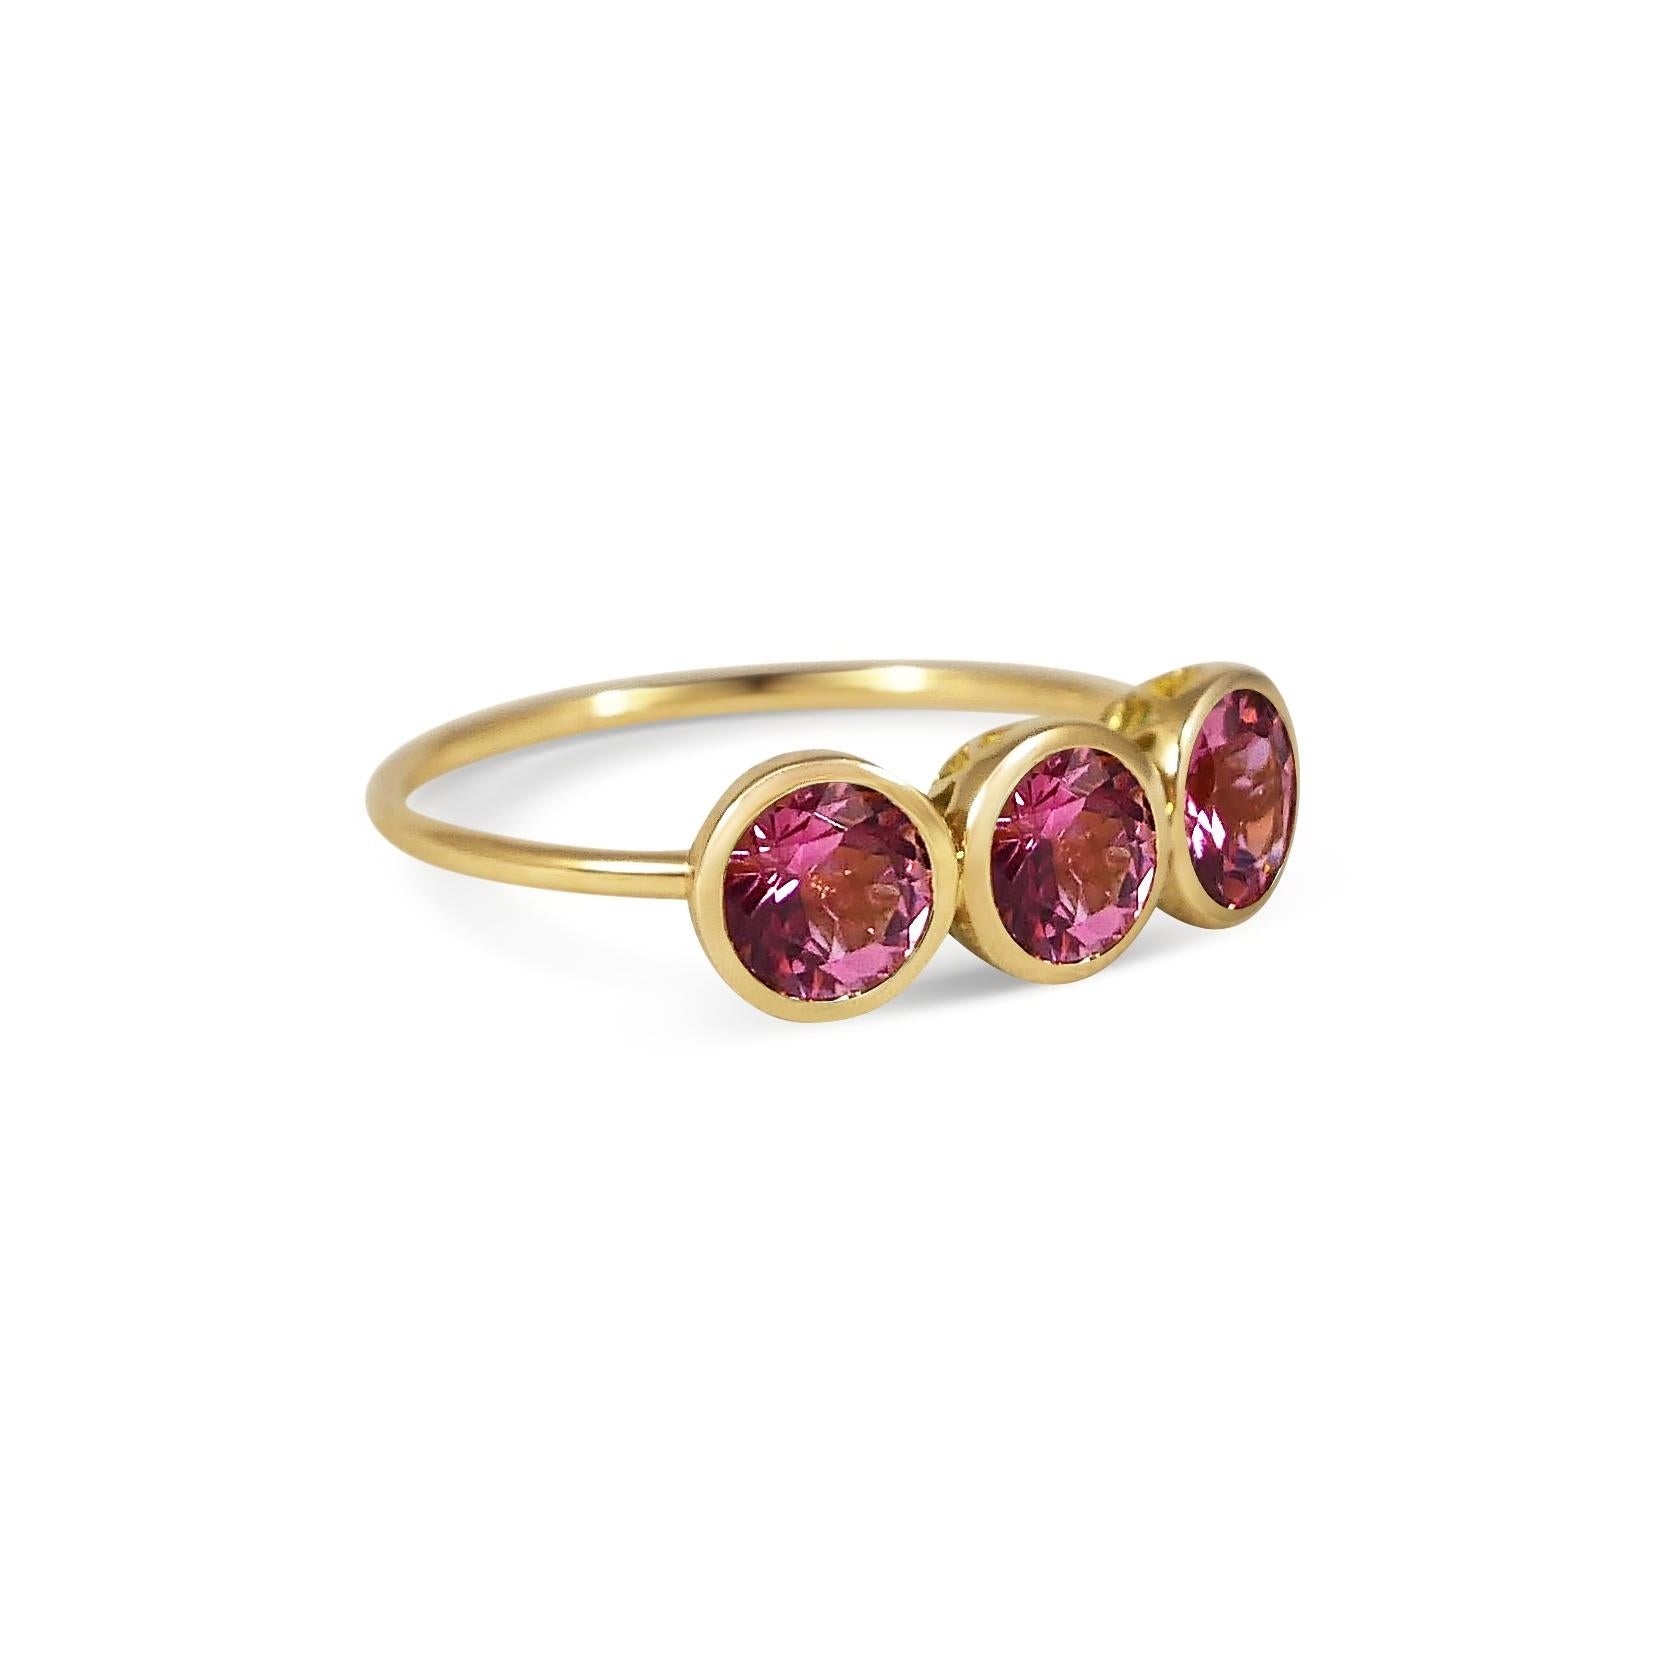 Handcrafted Round Cut 1.50 Carats Pink Tourmalines 18 Karat Yellow Gold Three-Stone Ring. This classic three-stone or trilogy ring features round brilliant cut stones set in a rub over setting on a simple band. The 6mm natural Pink Tourmaline stones